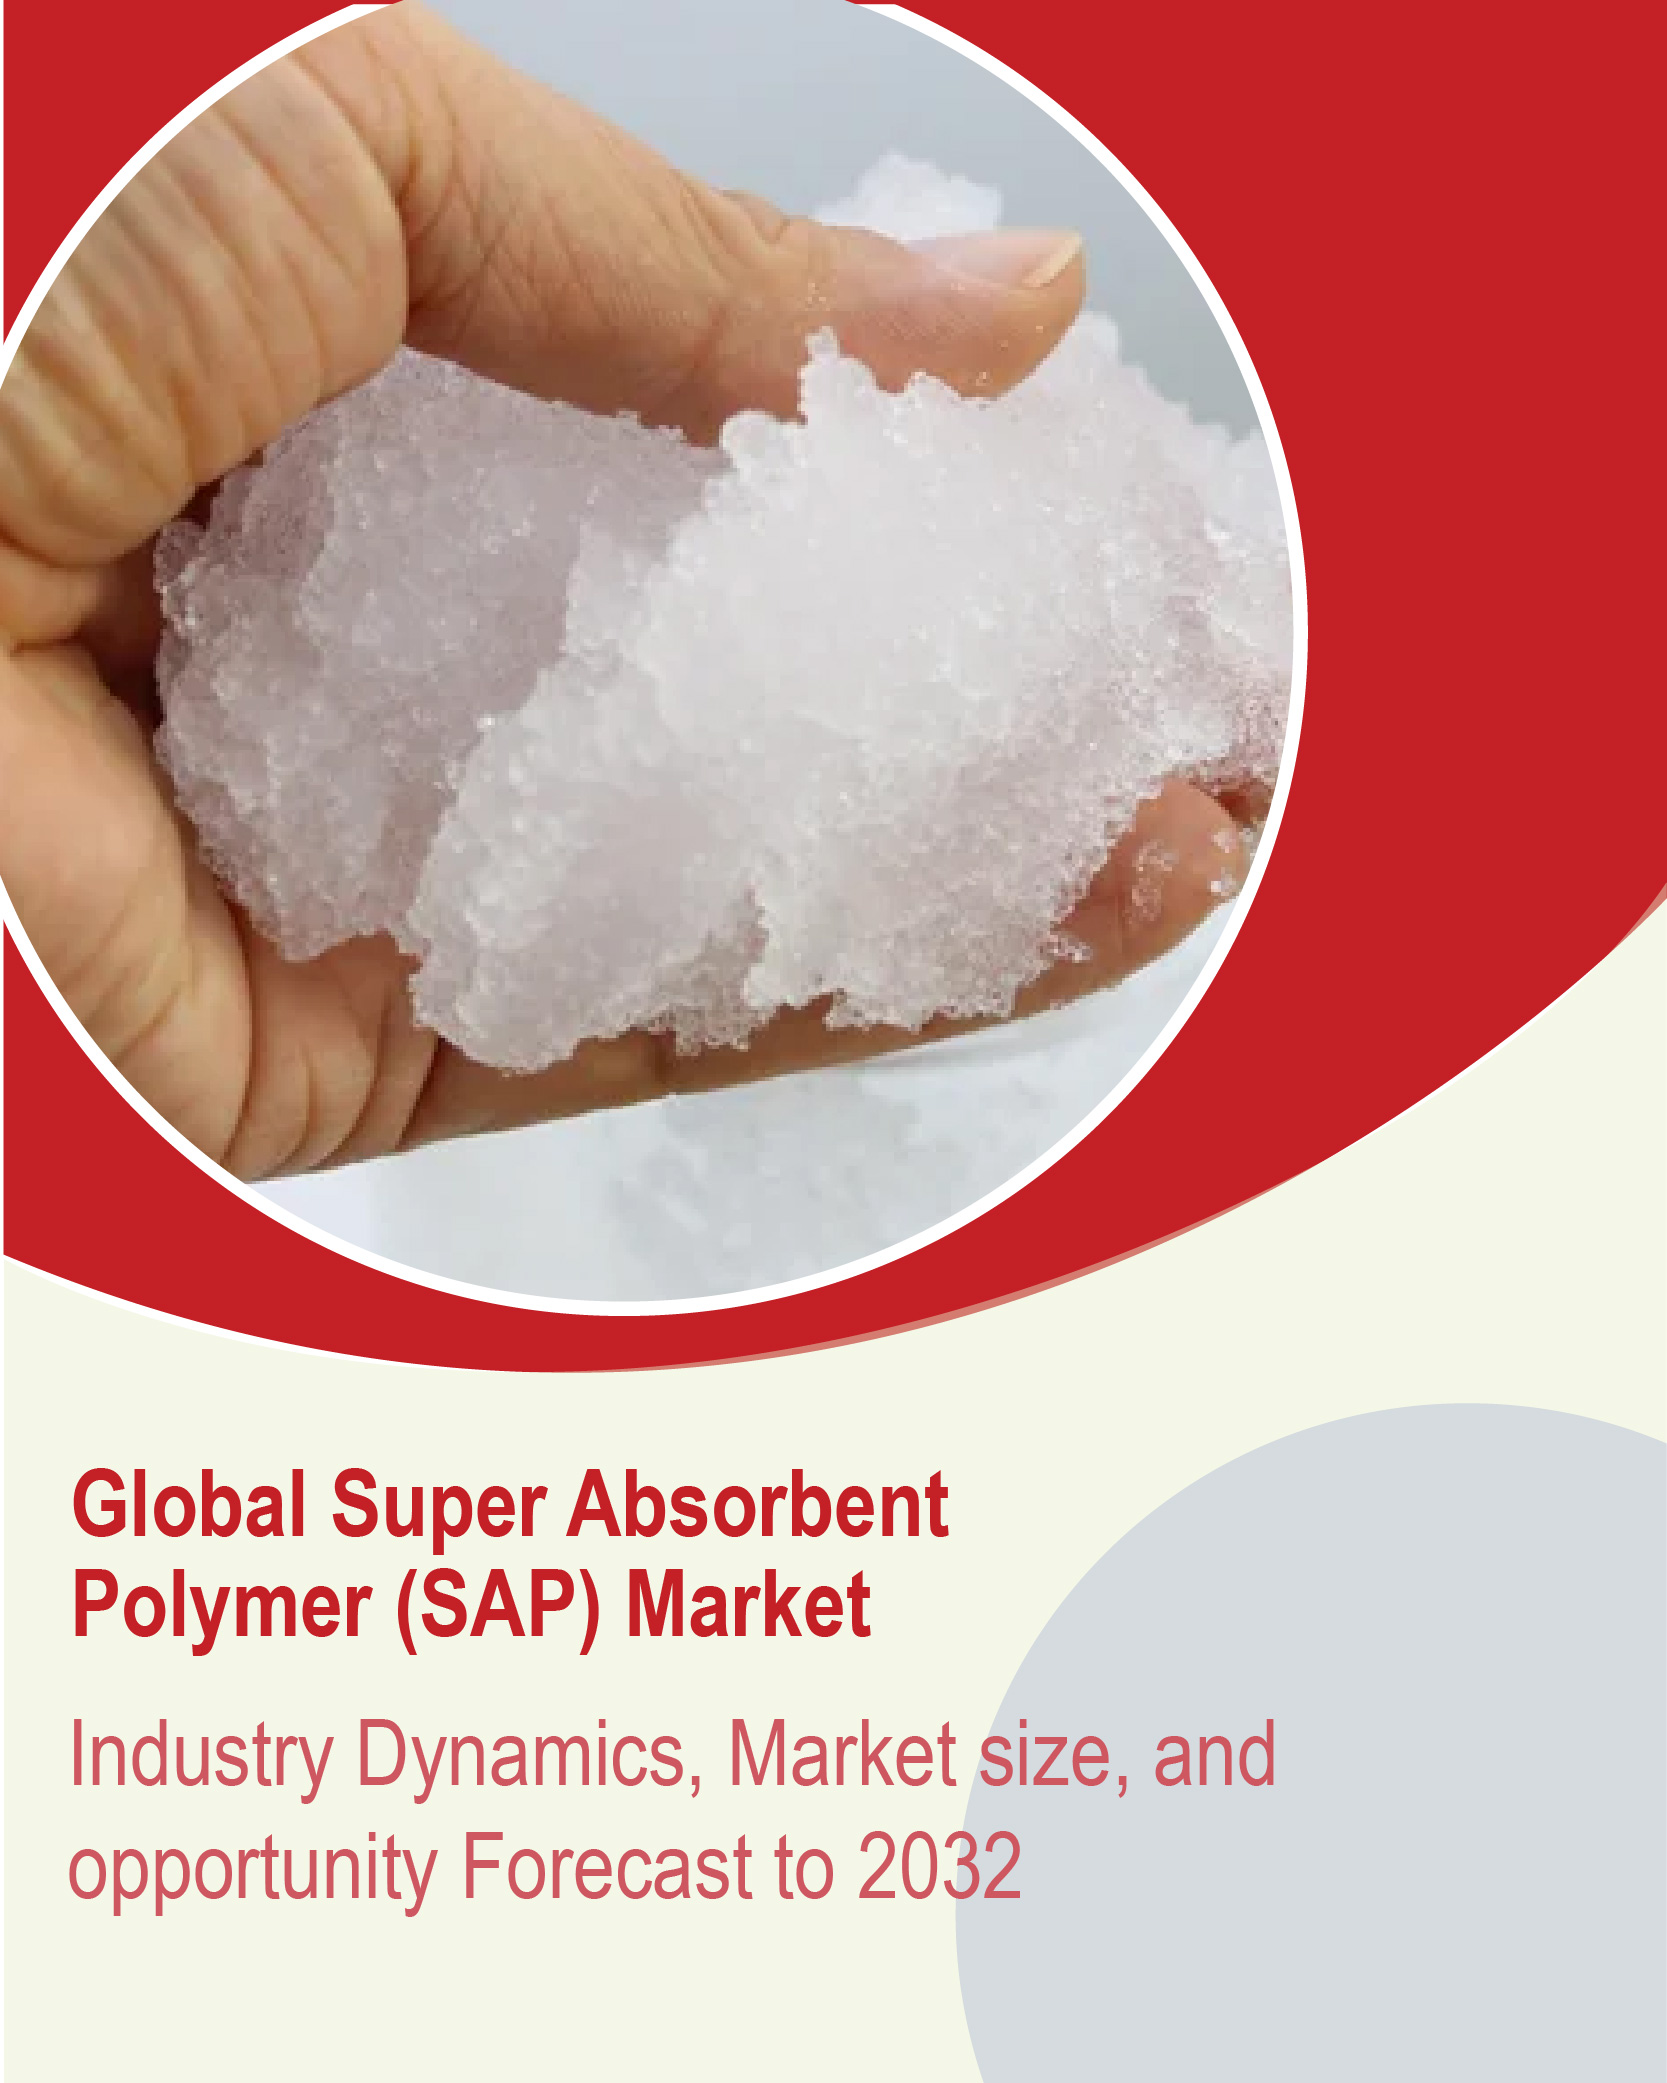 What is Super Absorbent Polymer and How It Works?